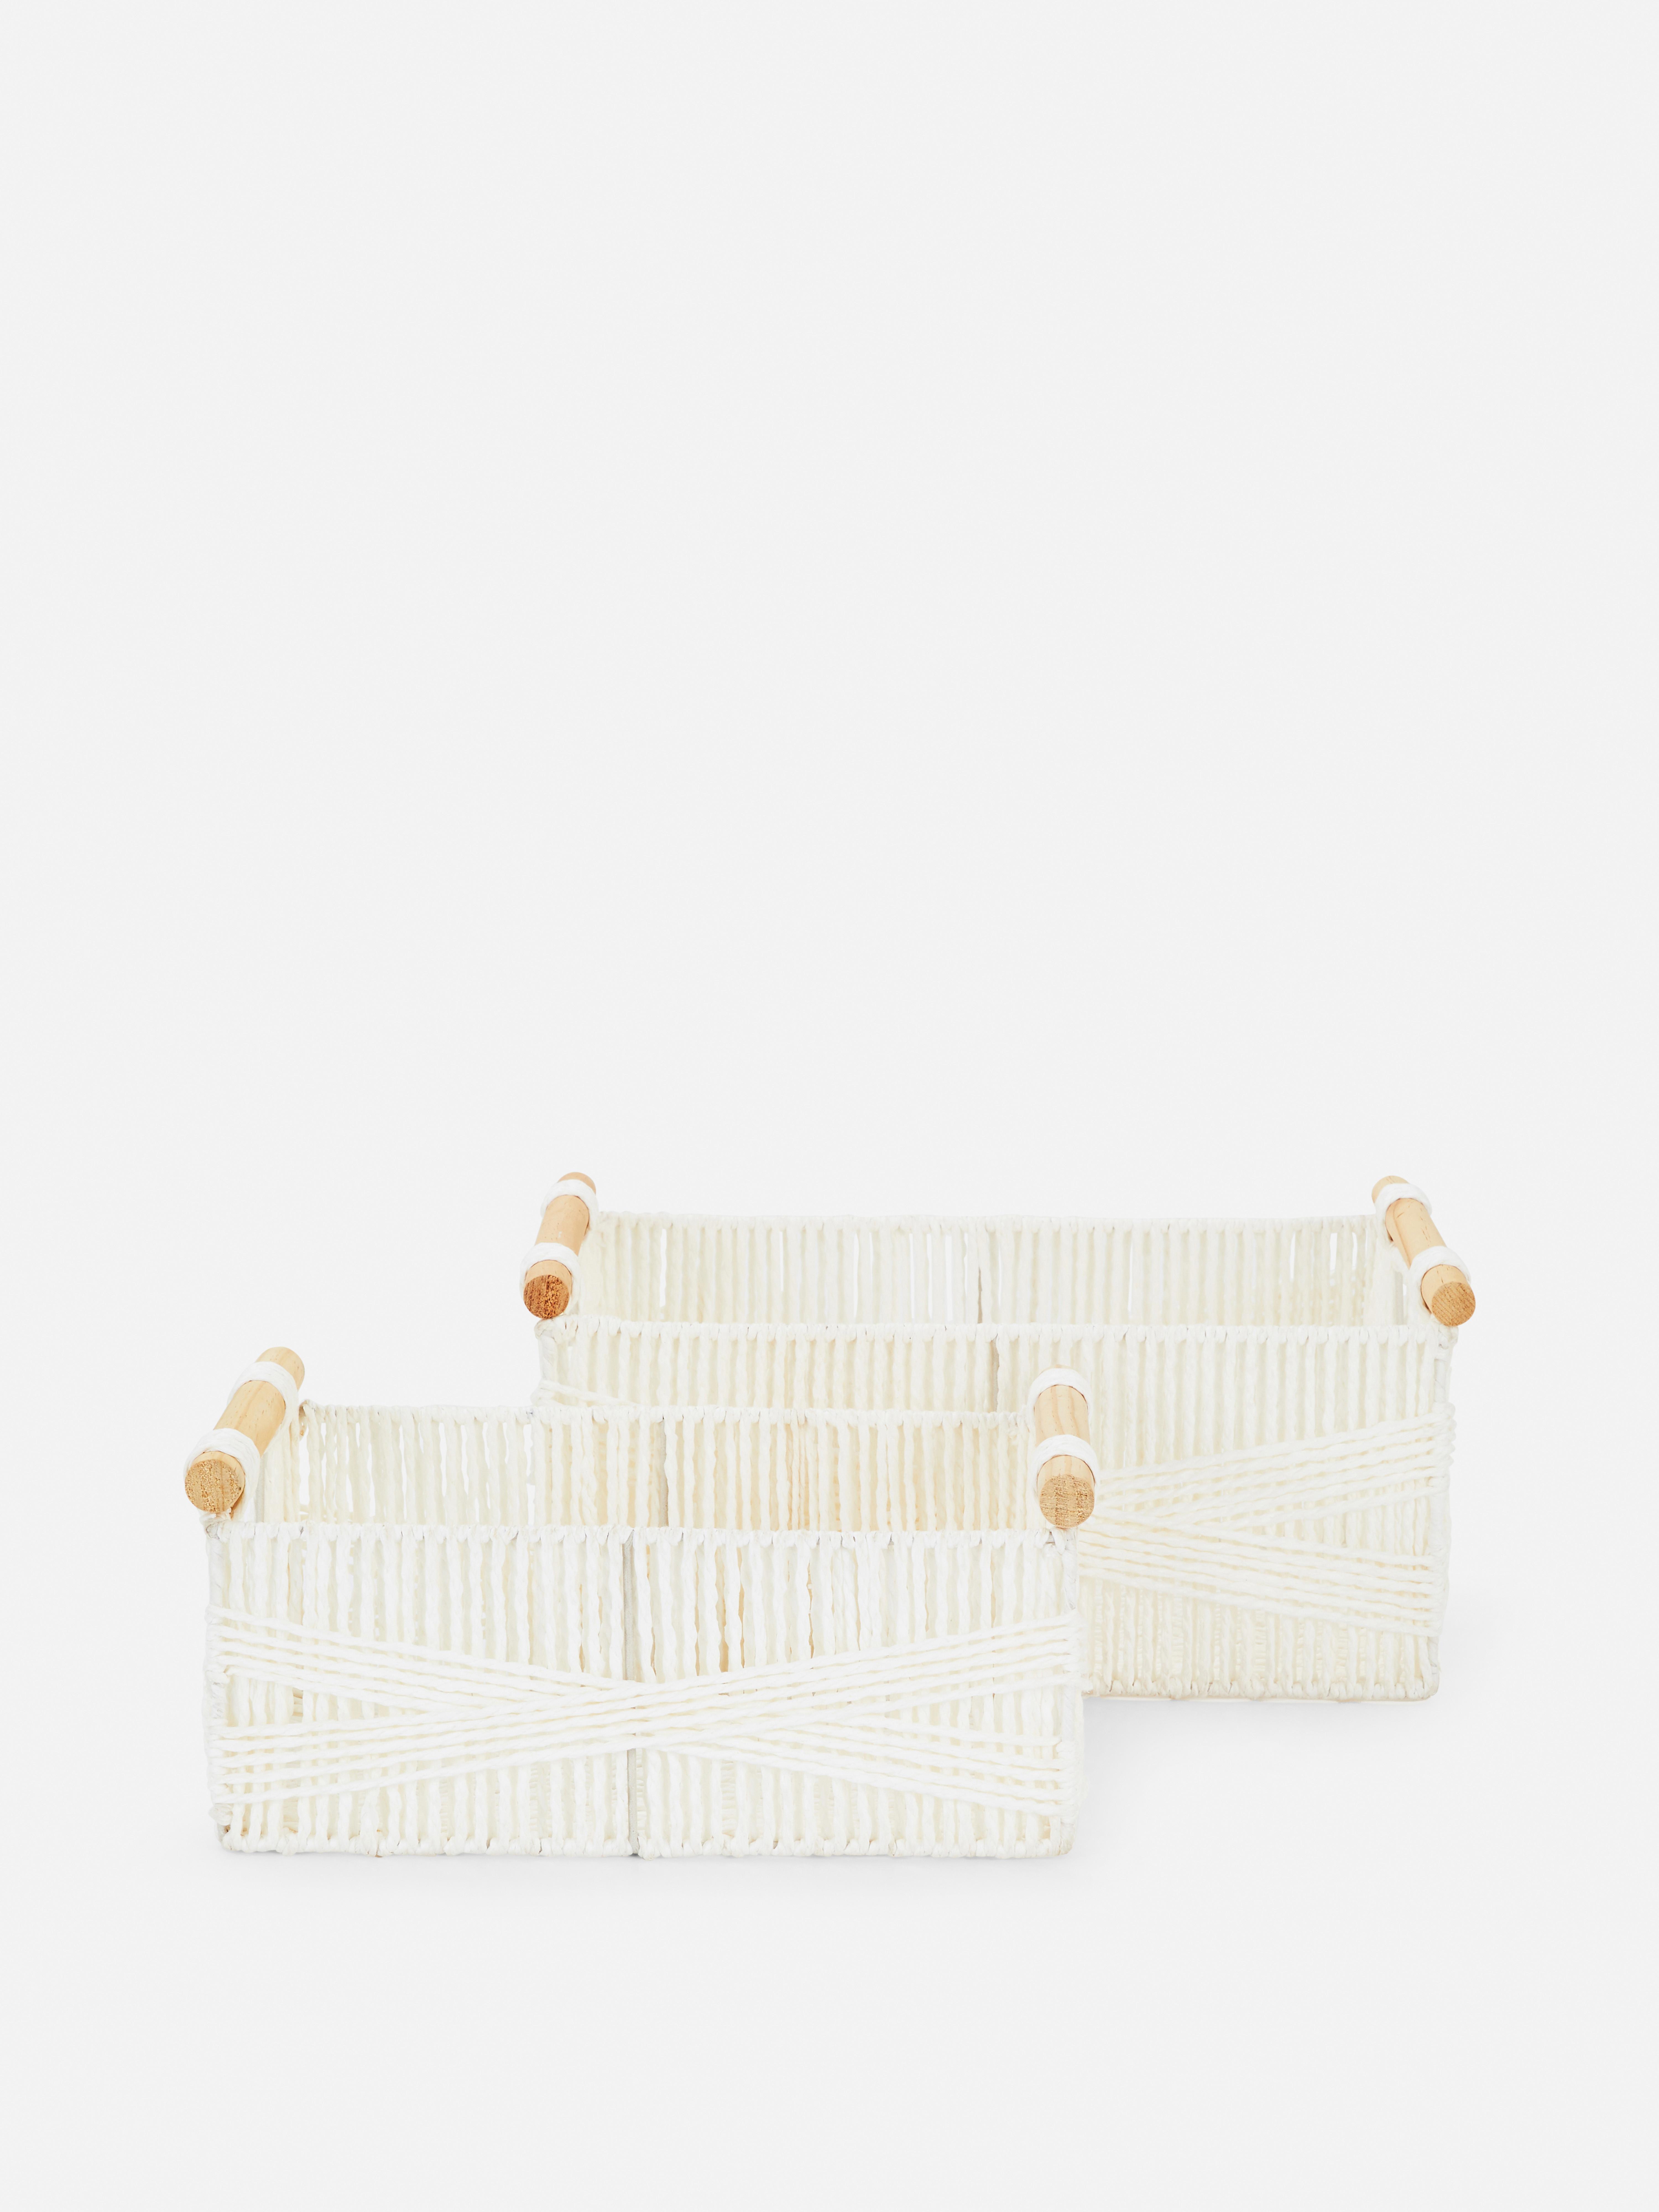 Two-Piece Wooden Handle Woven Storage Baskets